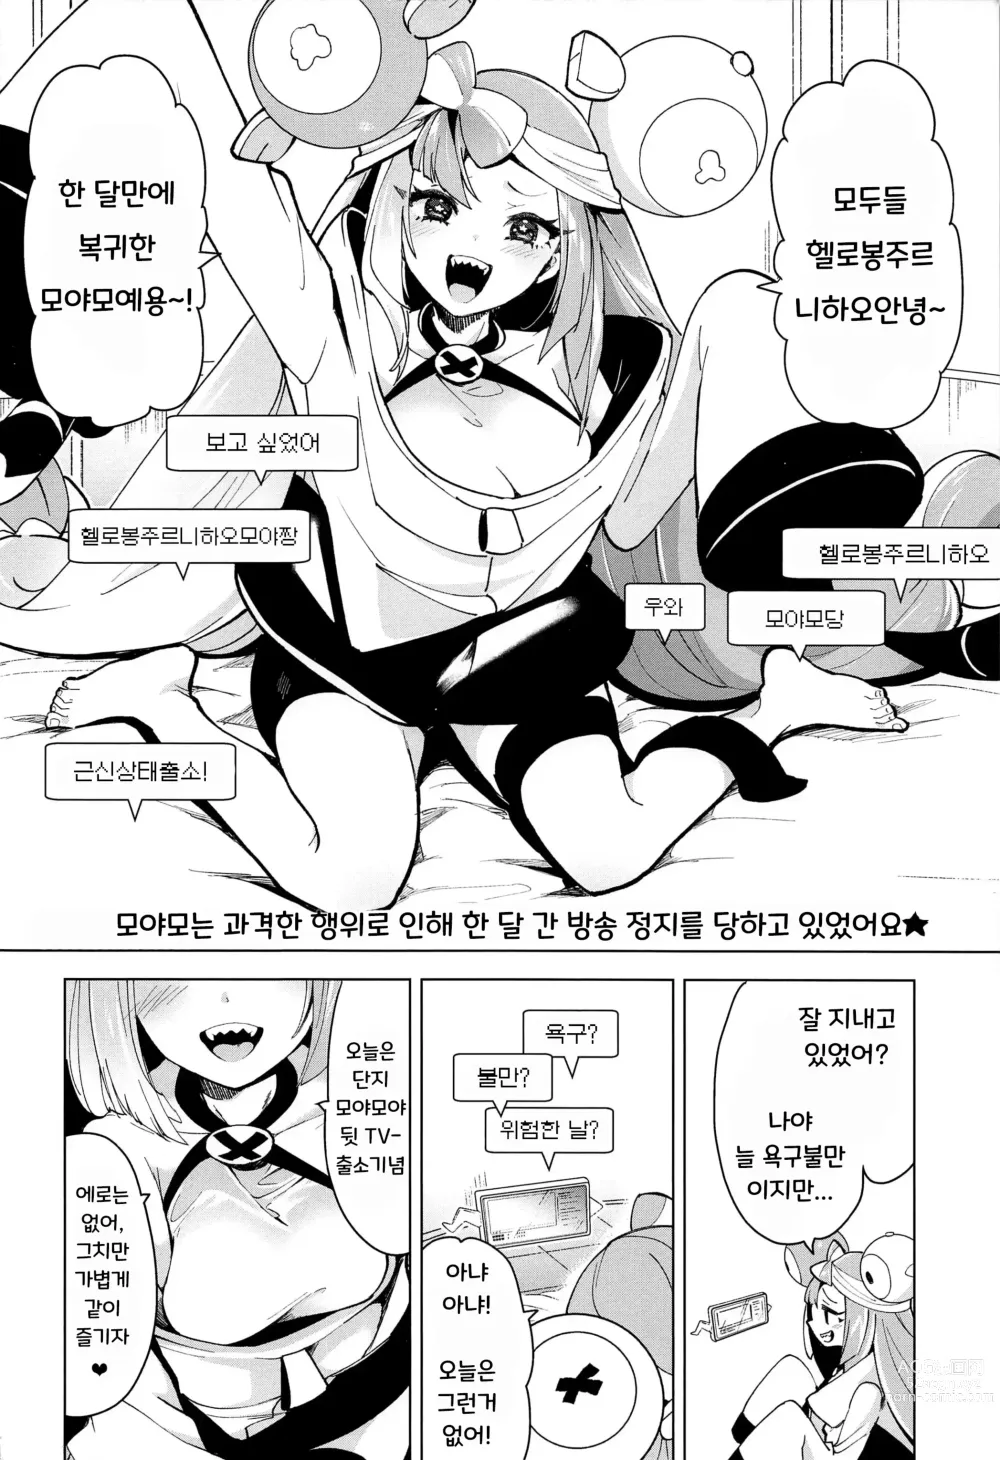 Page 3 of doujinshi 모야모 생삽입 No FILTERS LIVE